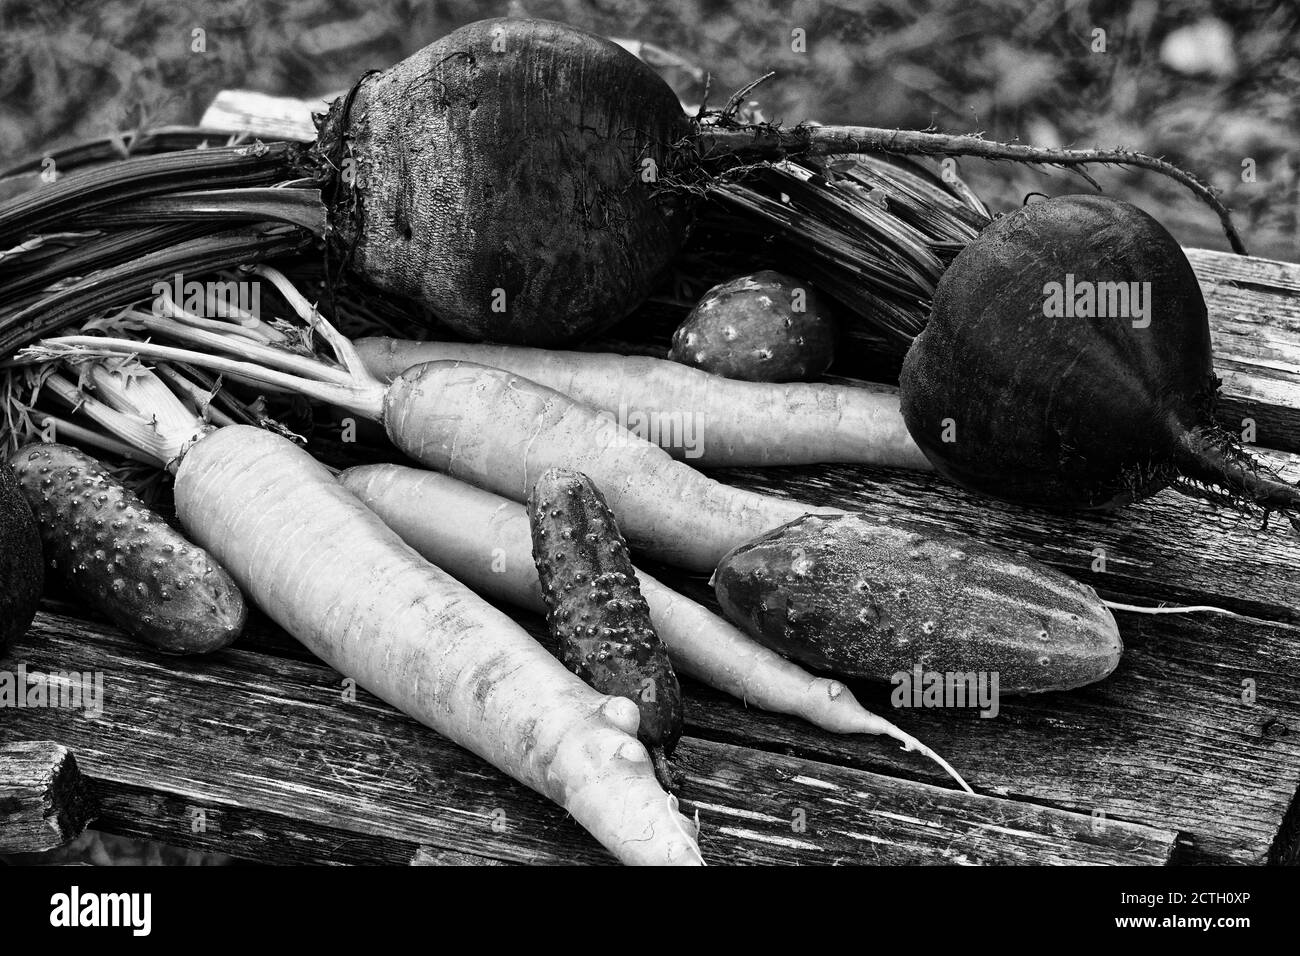 Photo cucumbers, vegetables, beets, carrots,vegetables Stock Photo